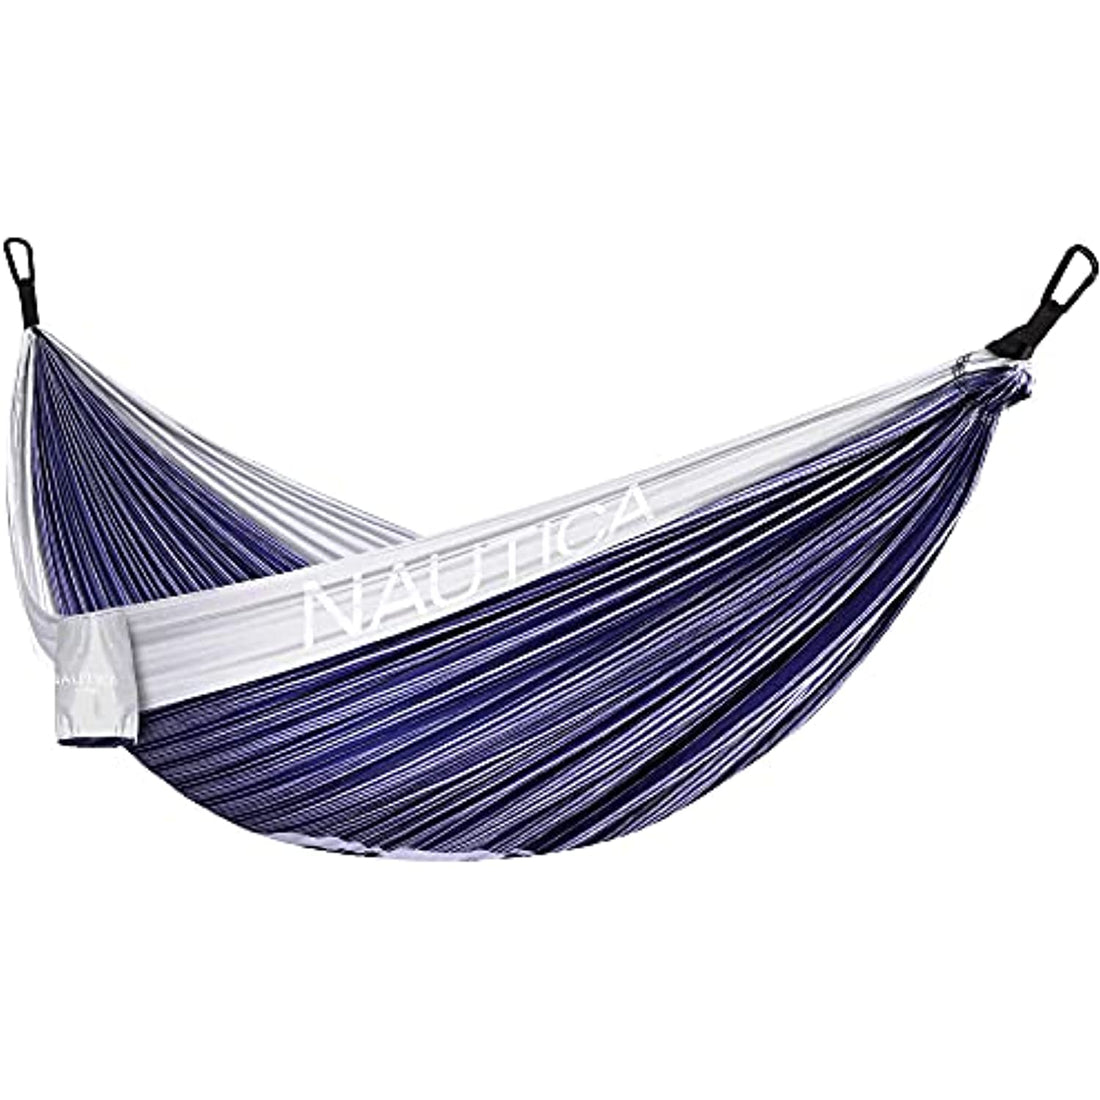 Nautica Portable Camping Hammock 1-2Person Kids or Adults with Straps, Caribiners & Bag for Travel/Backpacking/Hiking/Backyard/Lawn, Sugar Swizzle/Maritime Blue, Large